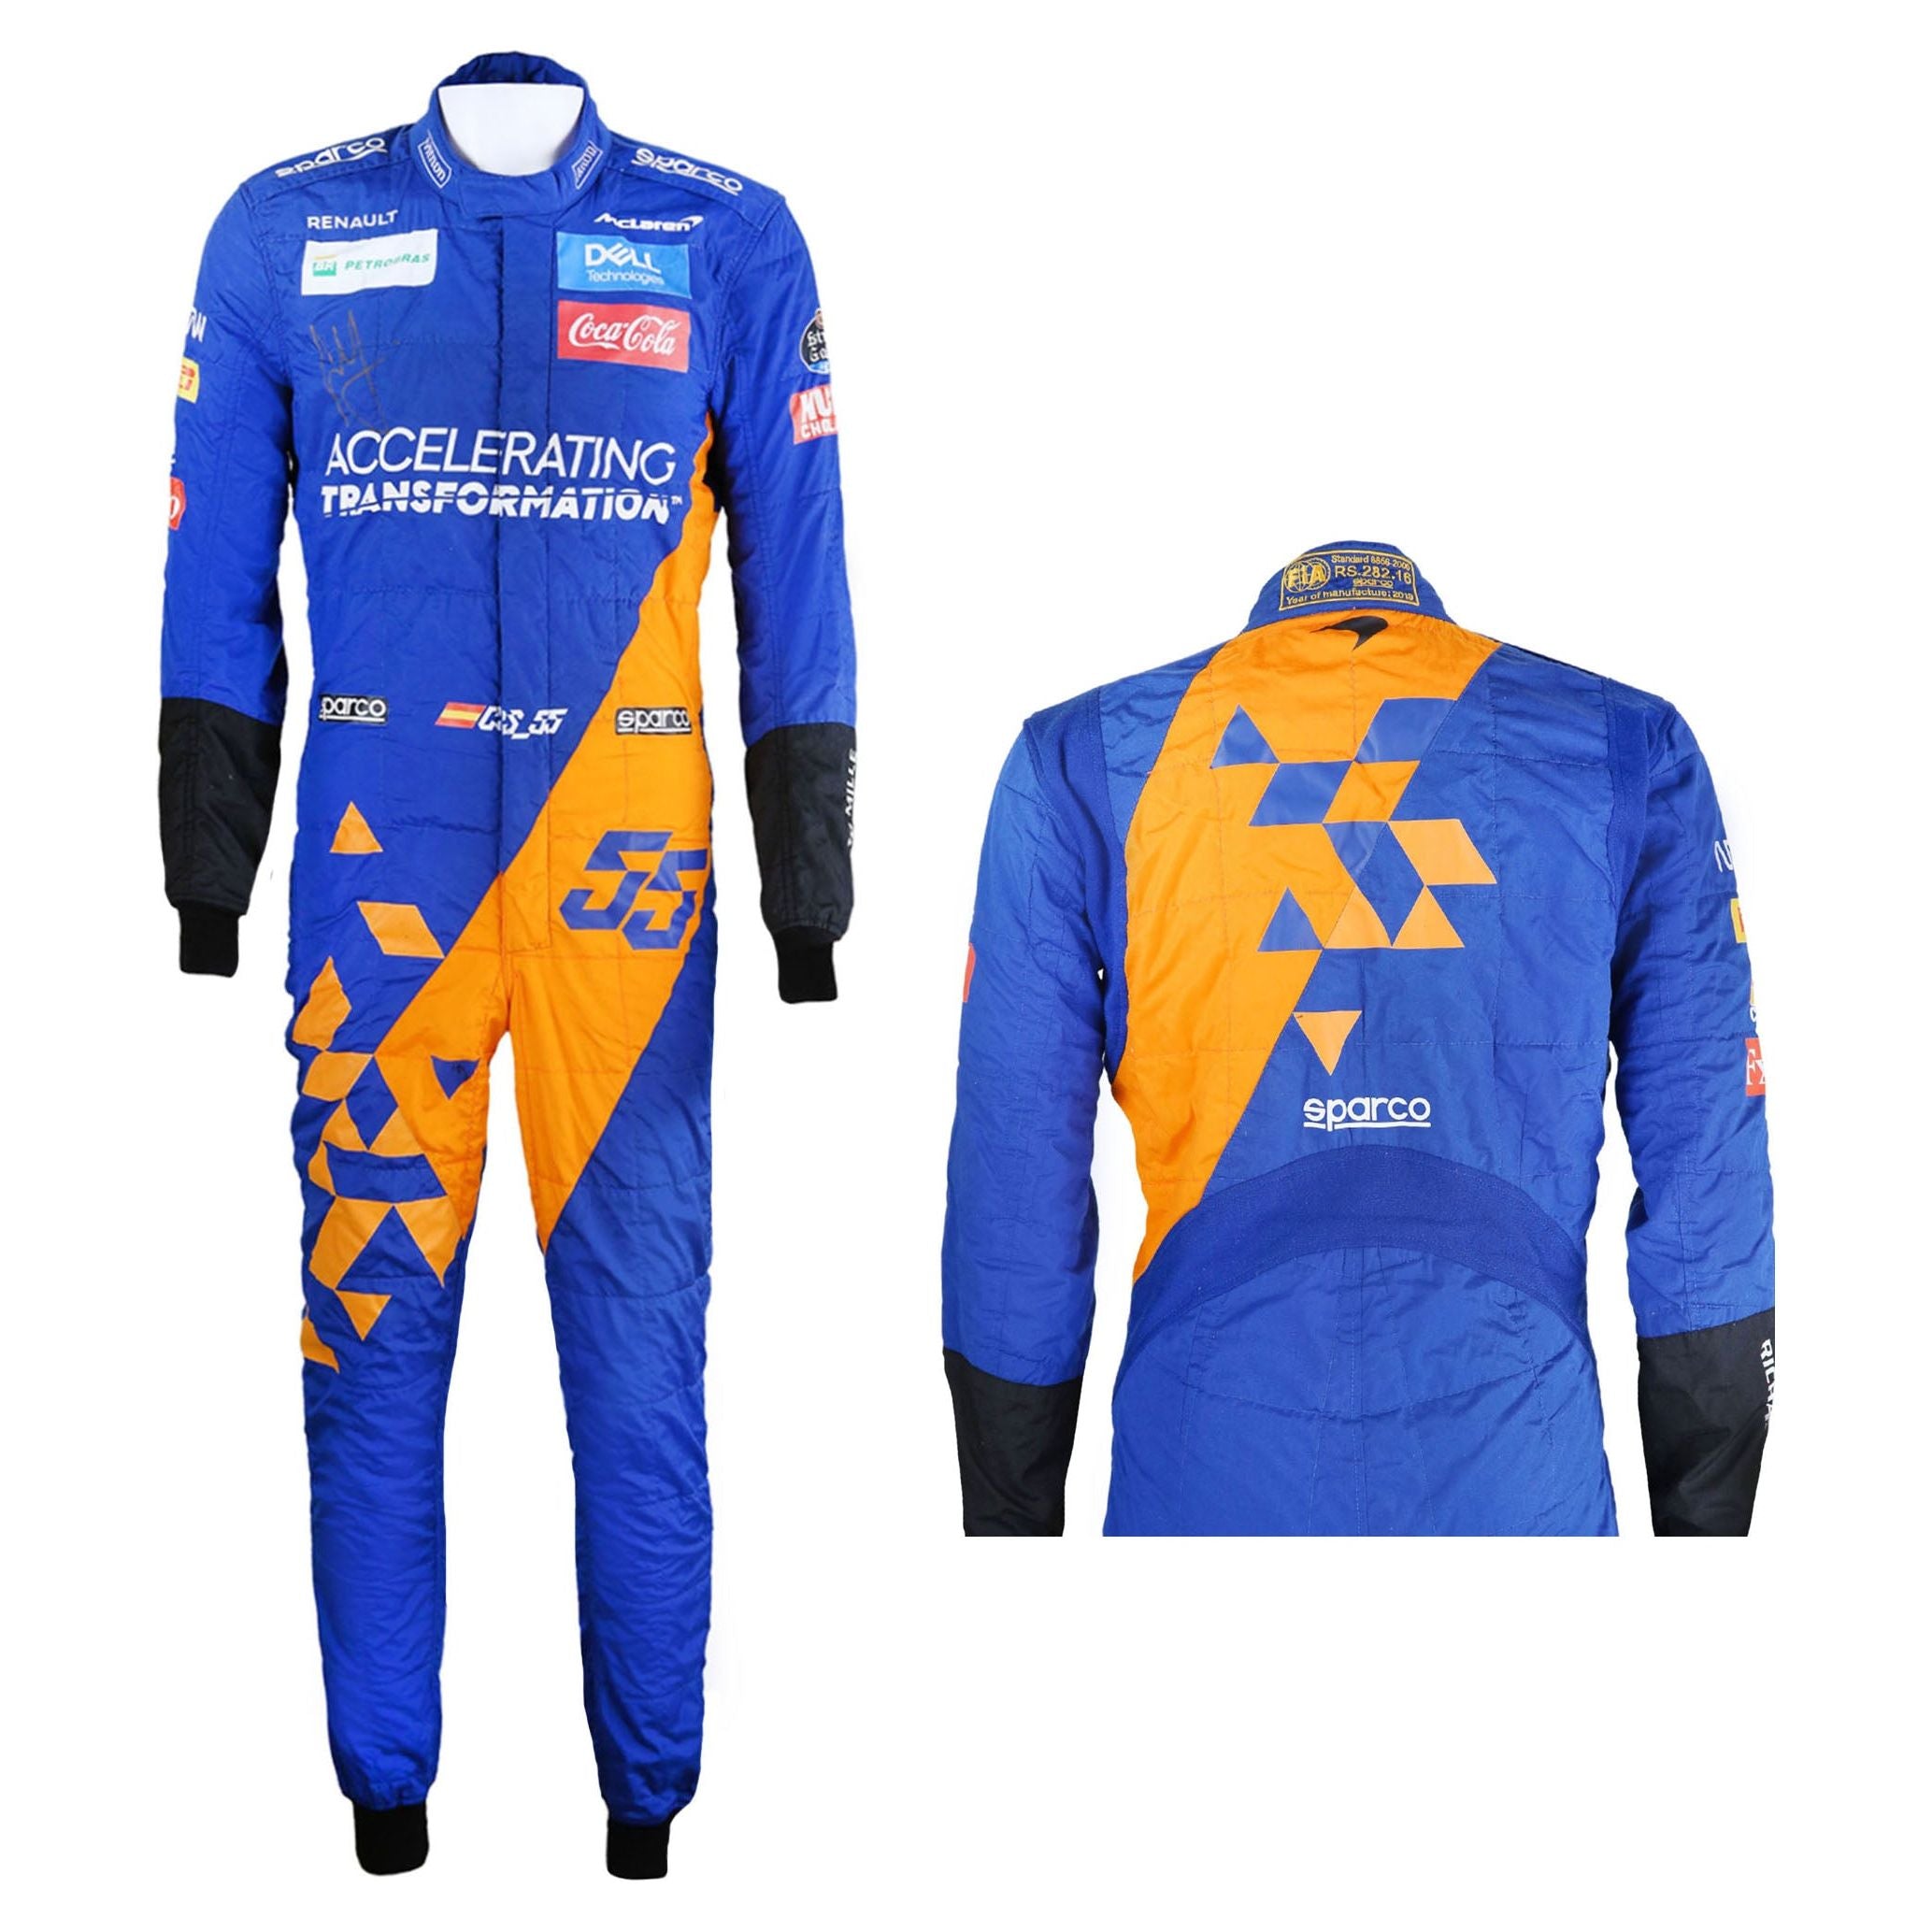 kart racing Sublimation Protective clothing Racing gear Suit N-0254